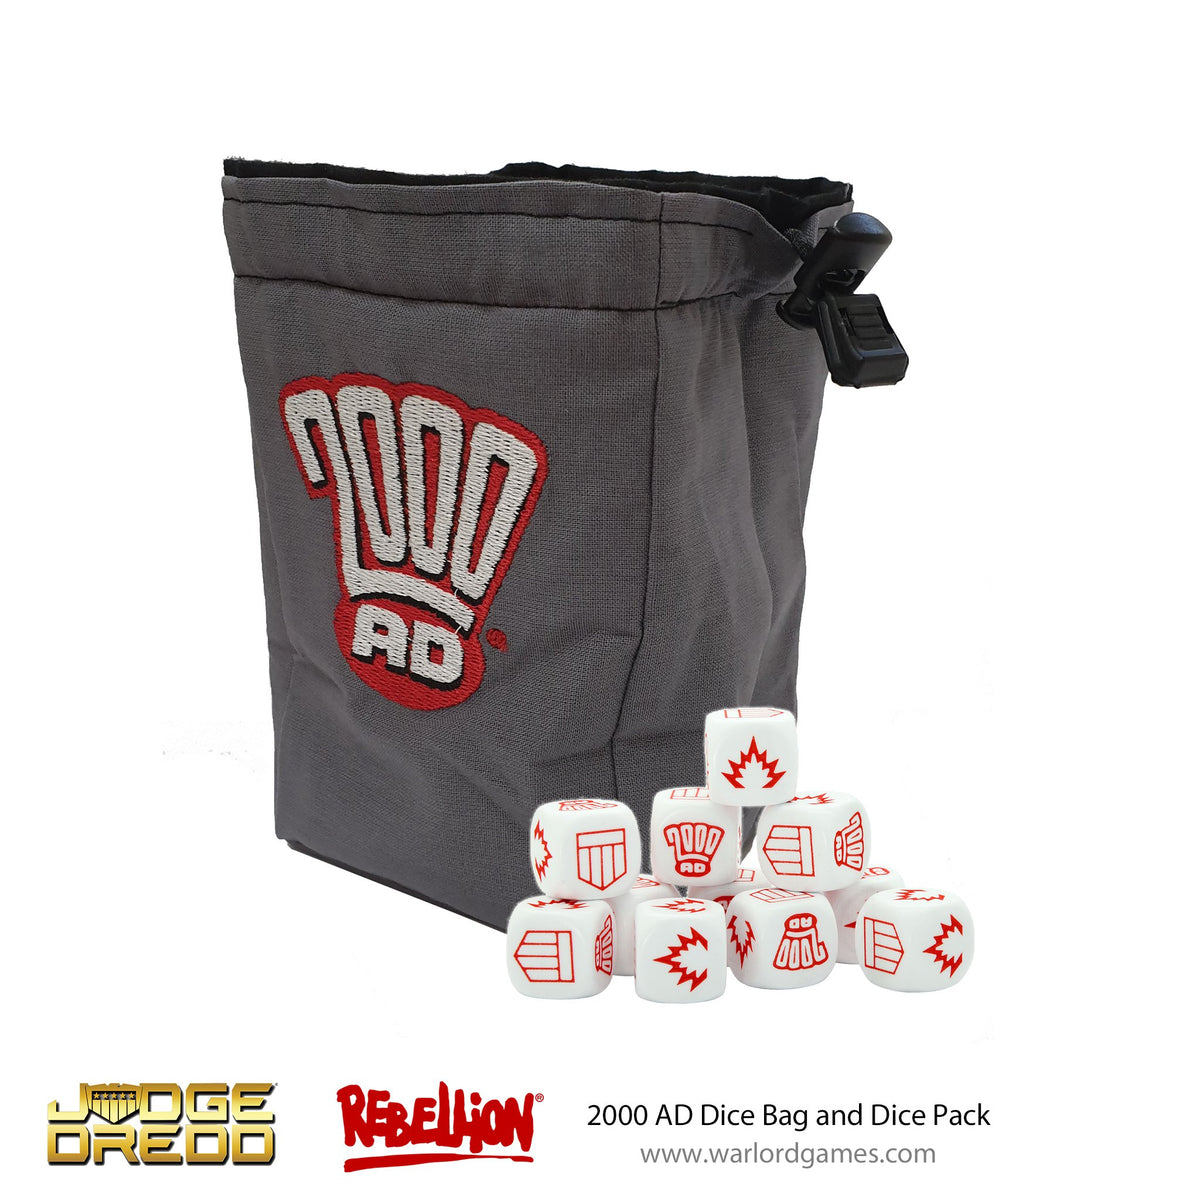 2000 AD Dice bag and dice pack